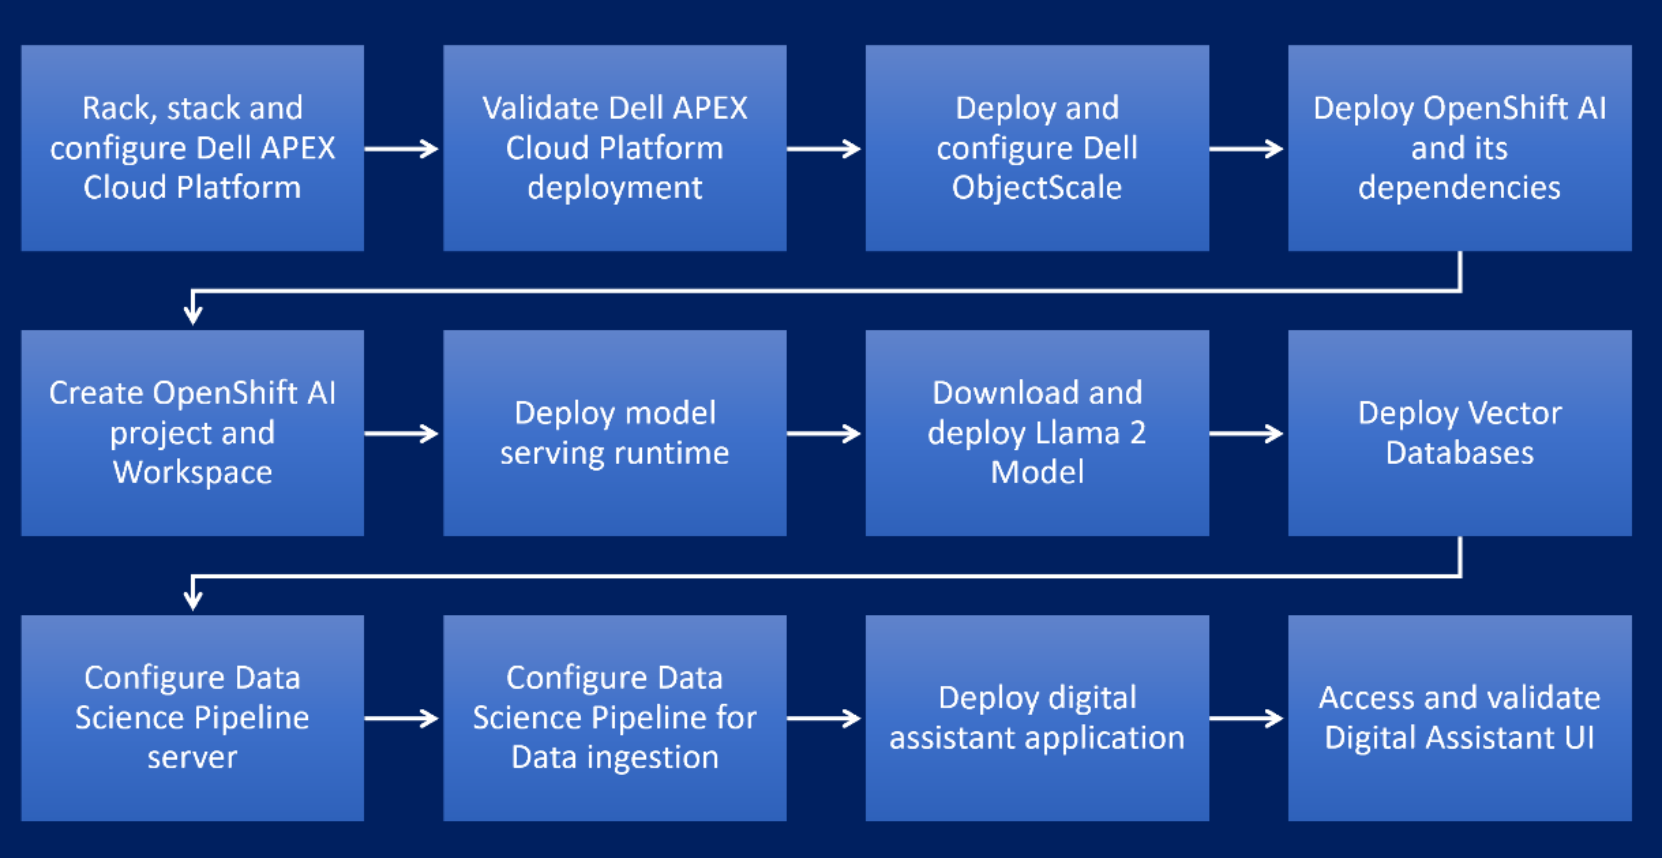 This is a flow diagram describes the digital assistant deployment steps from configuring Dell APEX Cloud Platform to accessing the digital assistant user interface.